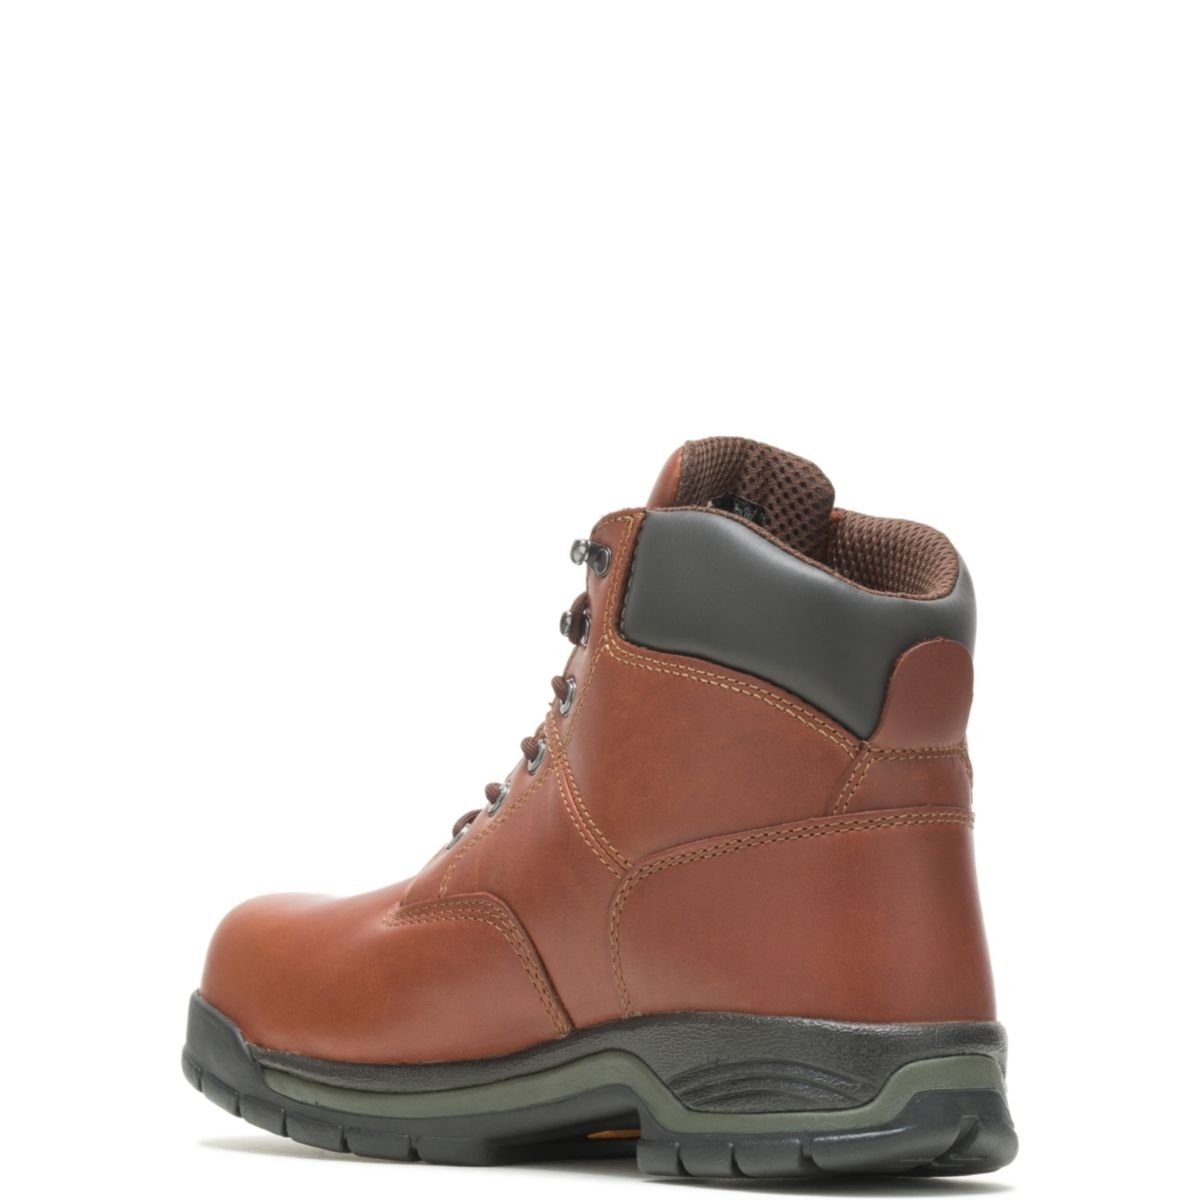 WOLVERINE Men's Harrison 6 Lace-Up Steel Toe Work Boot Brown - W04904 BROWN LEATHER - BROWN LEATHER, 9-4E